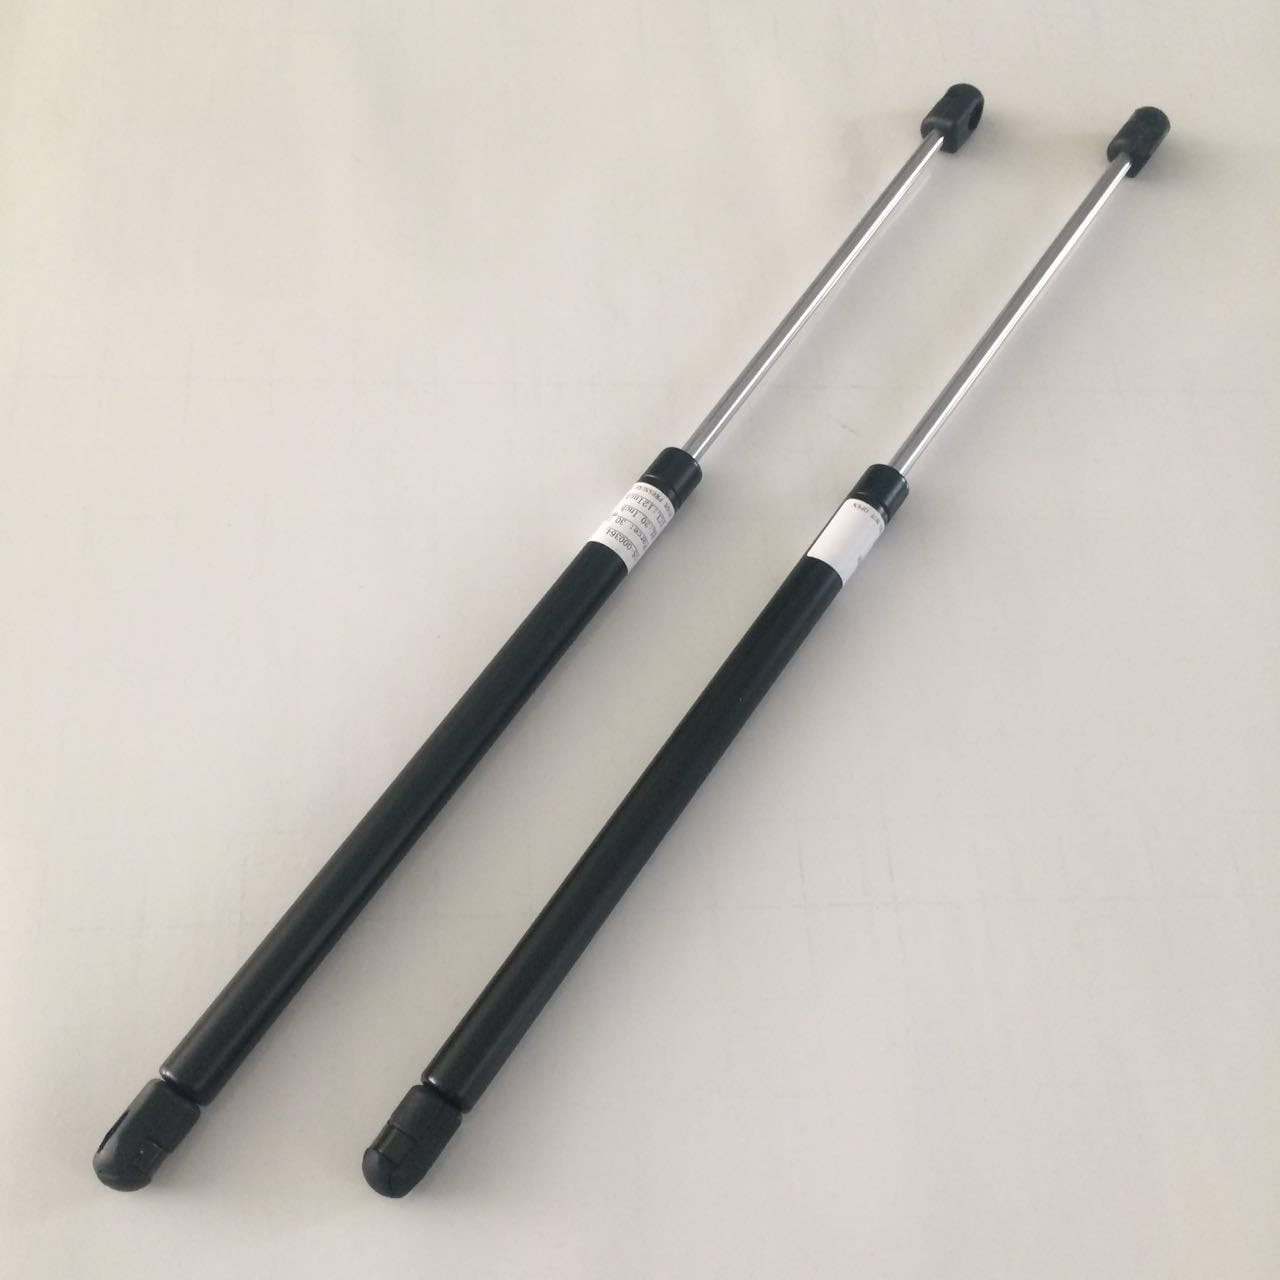 Qty 2 10mm Nylon End Lift Supports 18.5" Extended x 45lbs 